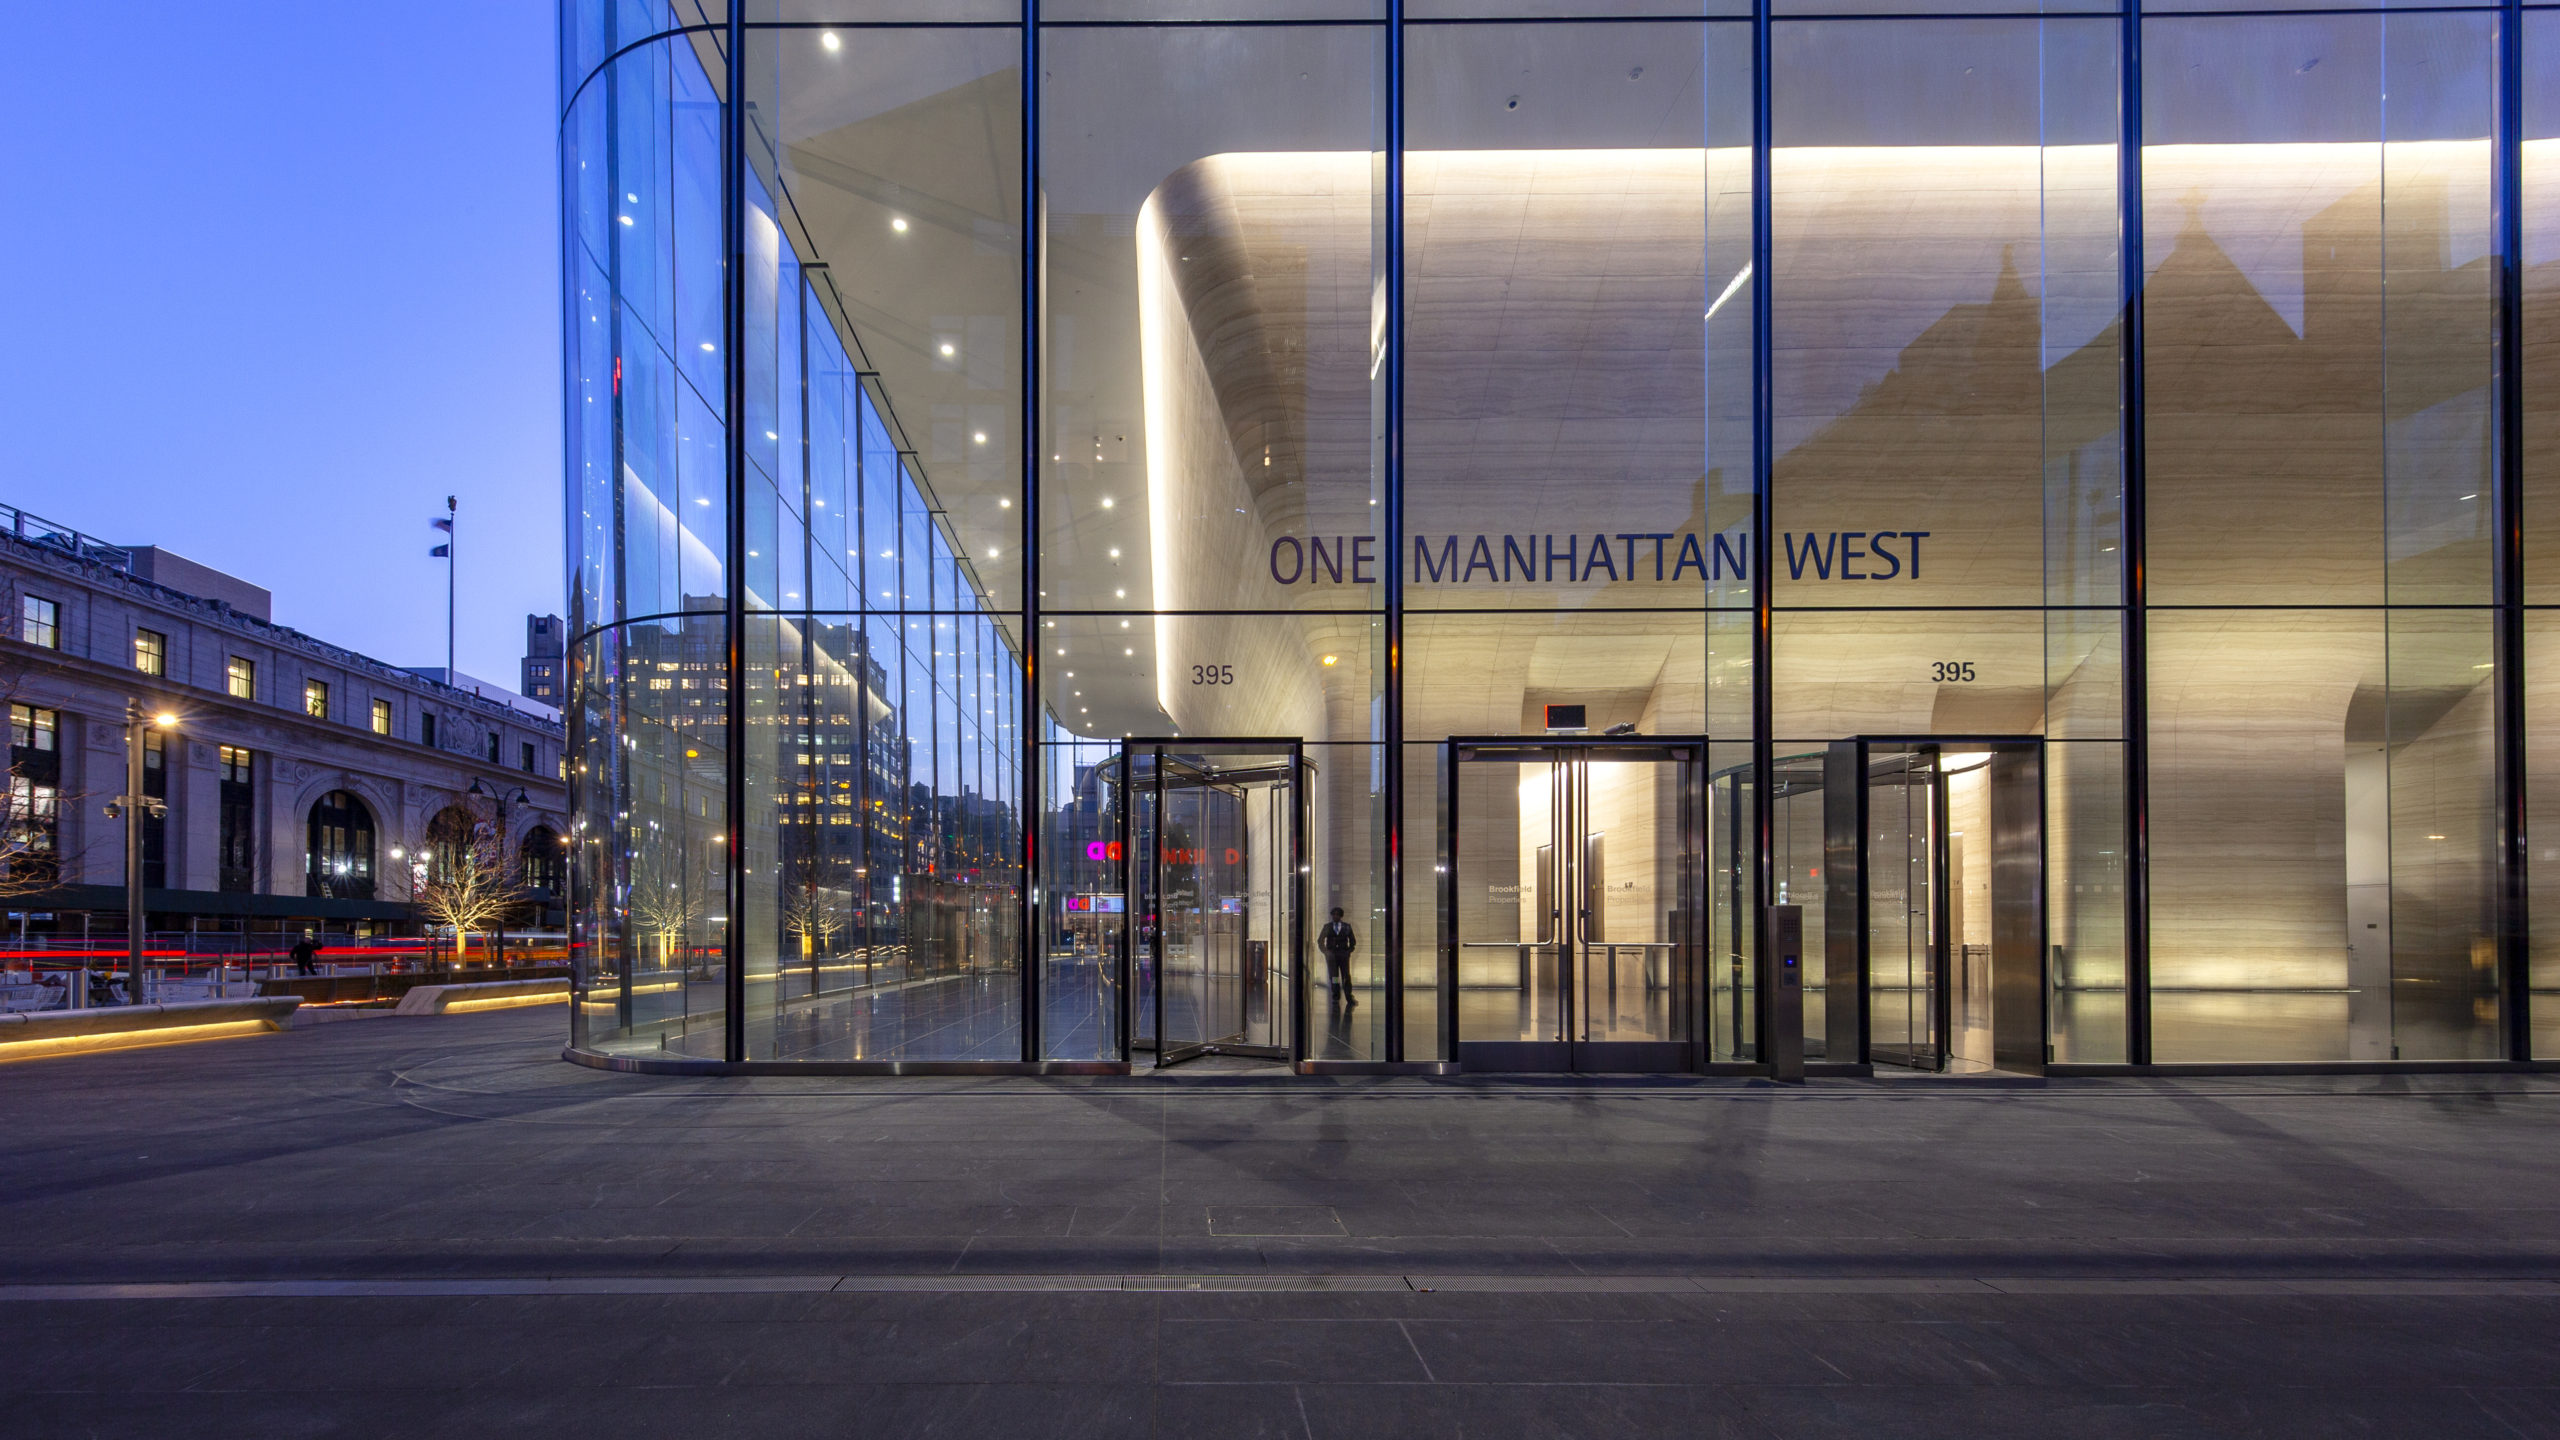 Architecture Merit Award: One Manhattan West by Skidmore, Owings & Merrill and James Corner Field Operations, in New York, NY. Photo: Lucas Blair Simpson/SOM.